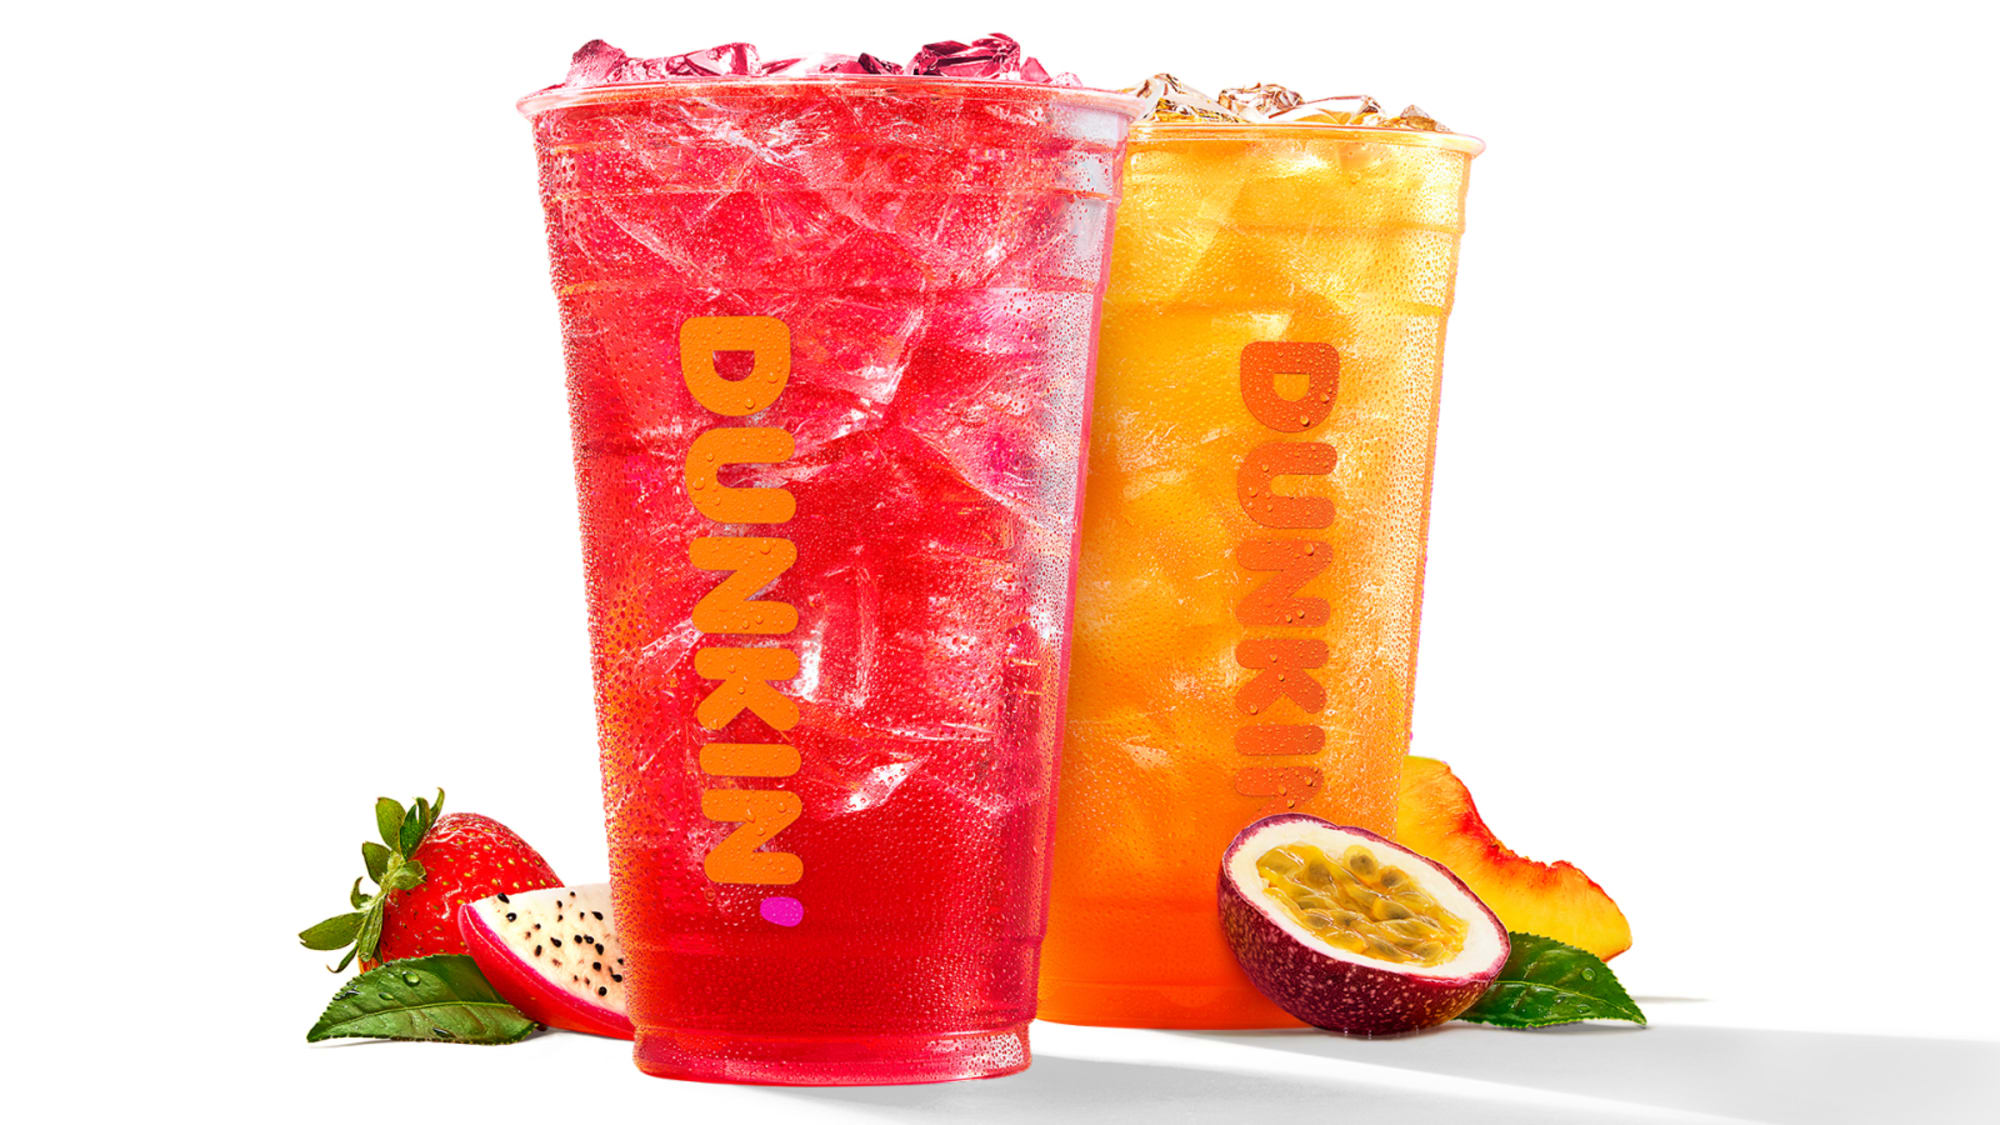 Dunkin is testing a variety of new drinks this summer, including Bubble Tea